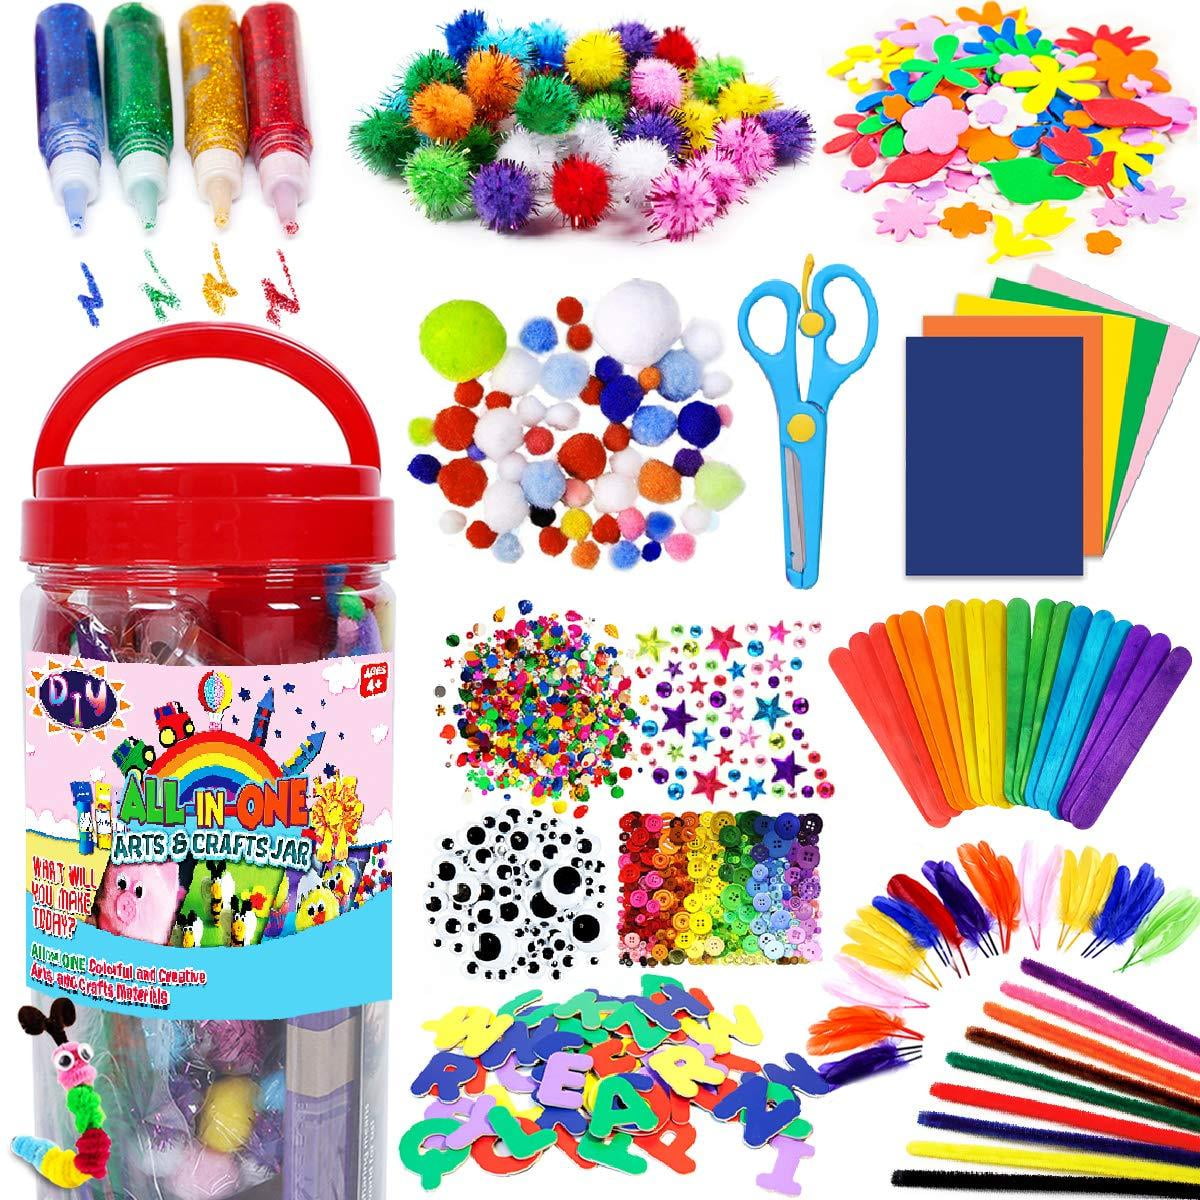 FunzBo Arts and Crafts Supplies for Kids - Craft Art Supply Kit for